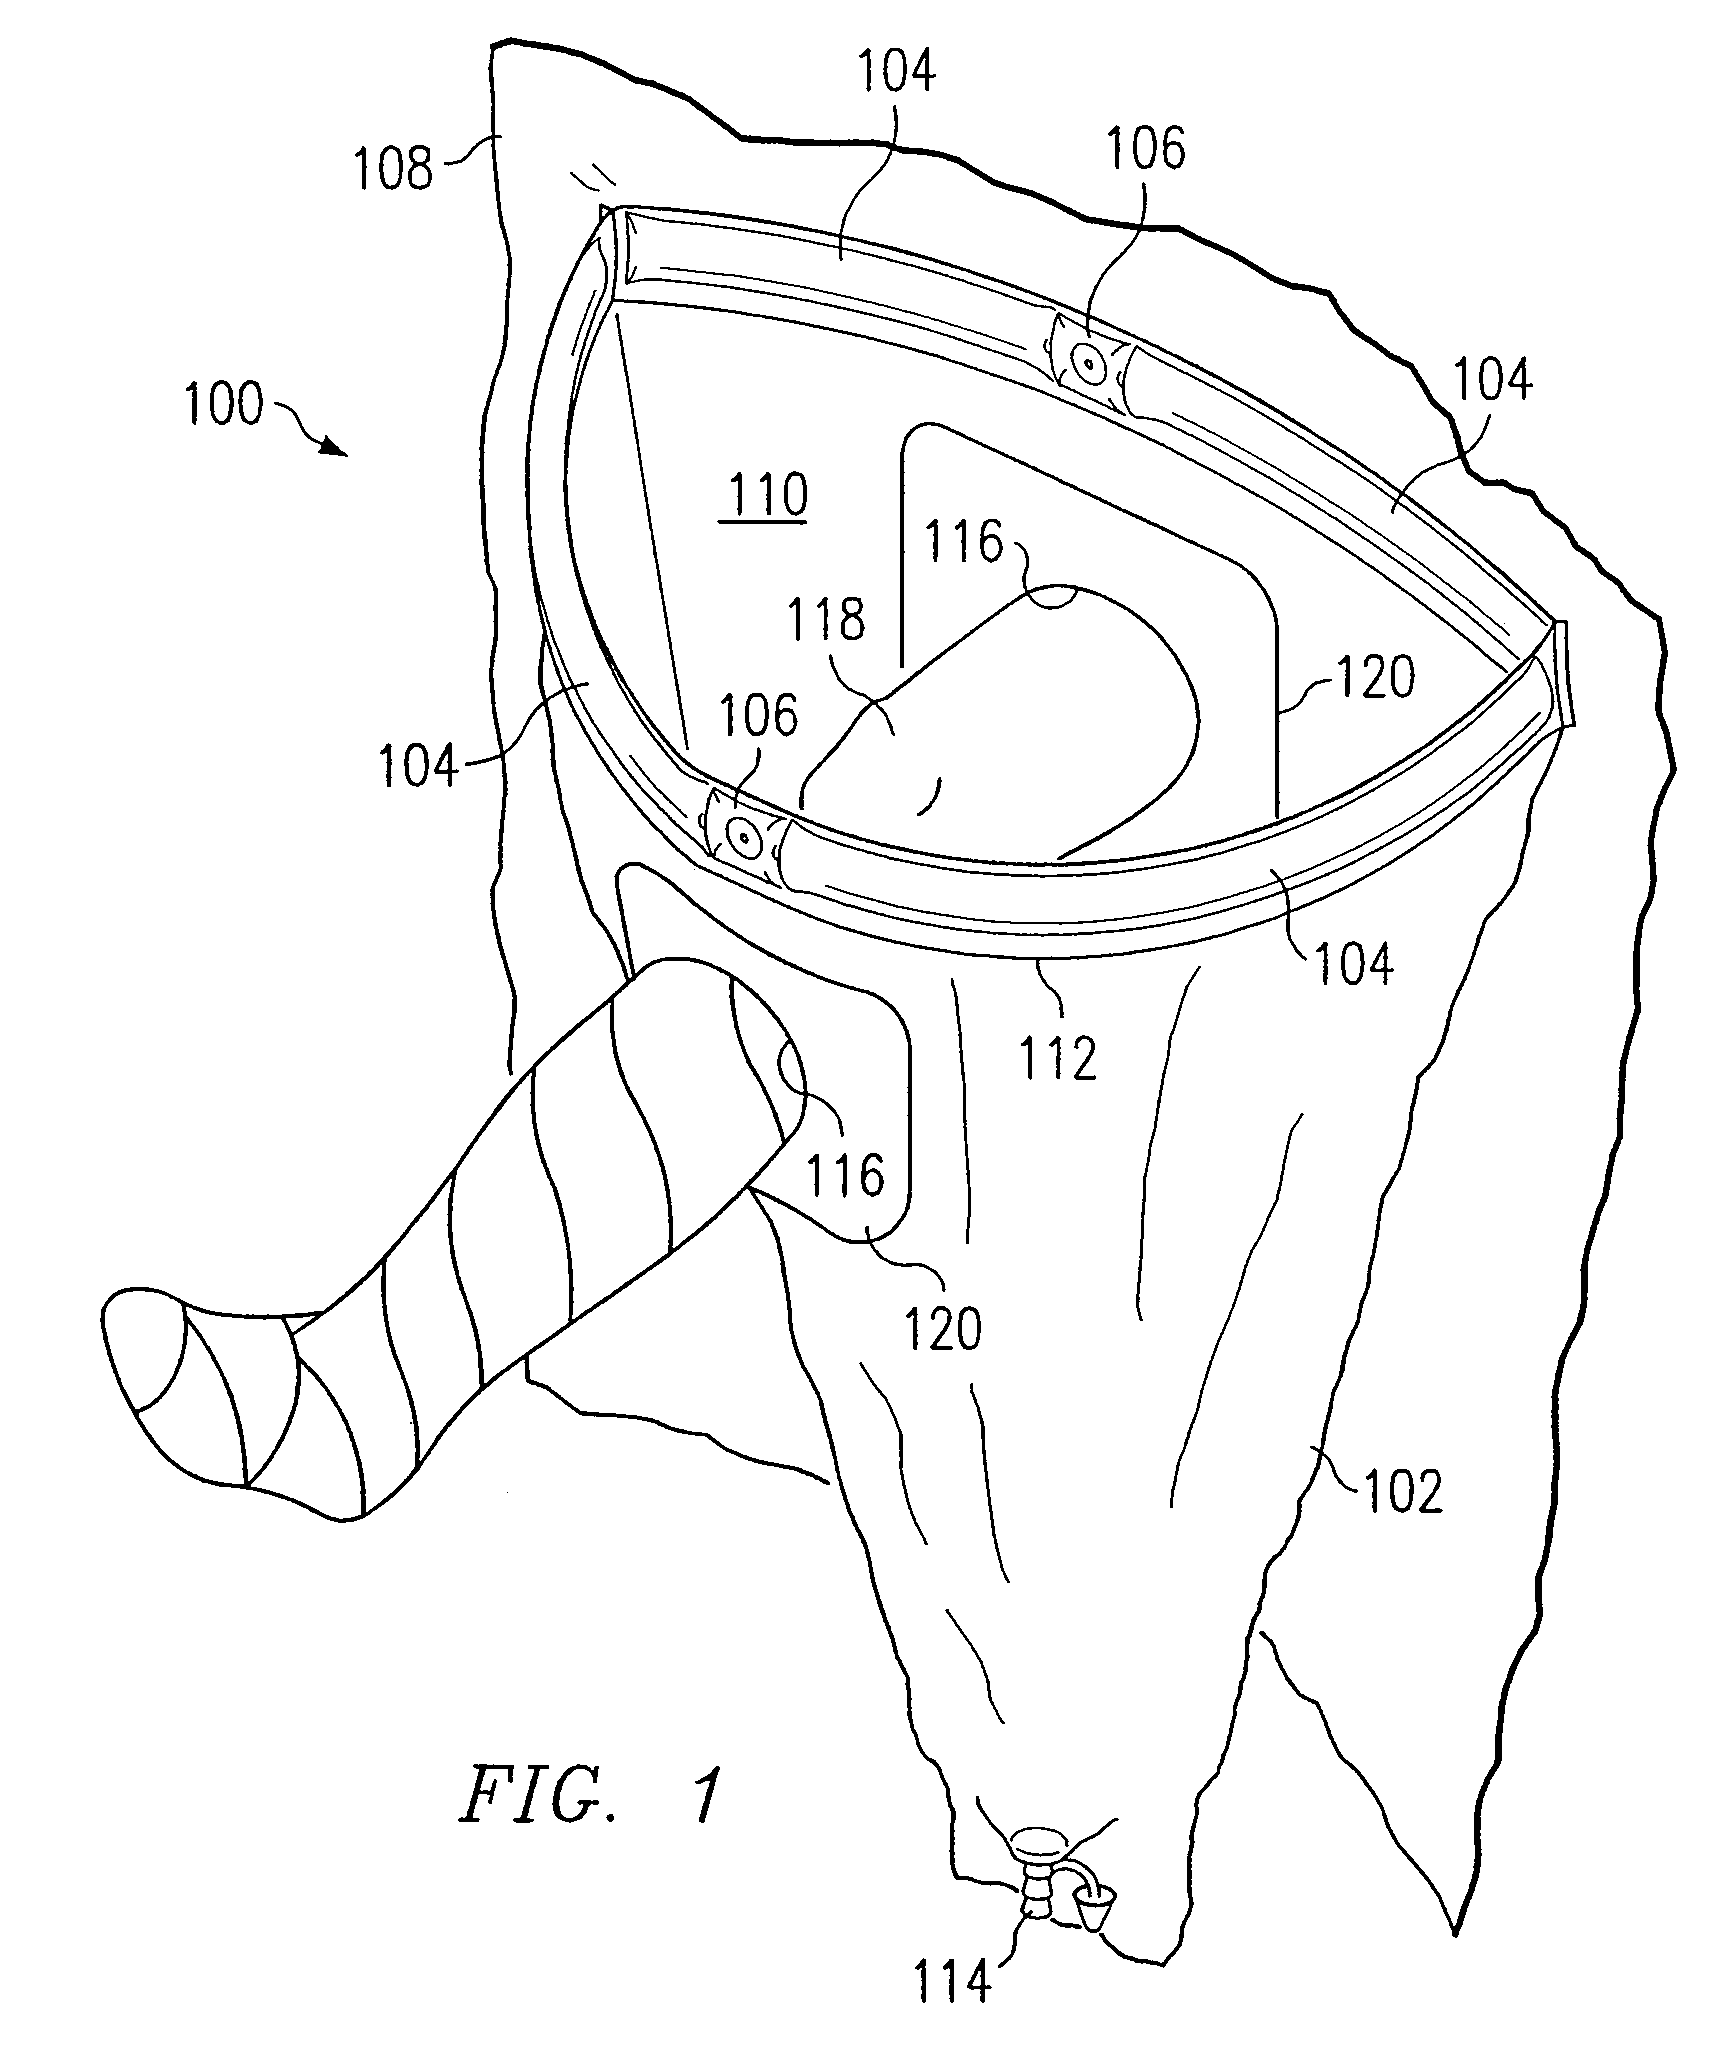 Surgical drape having a fluid collection pouch with an inflatable rim